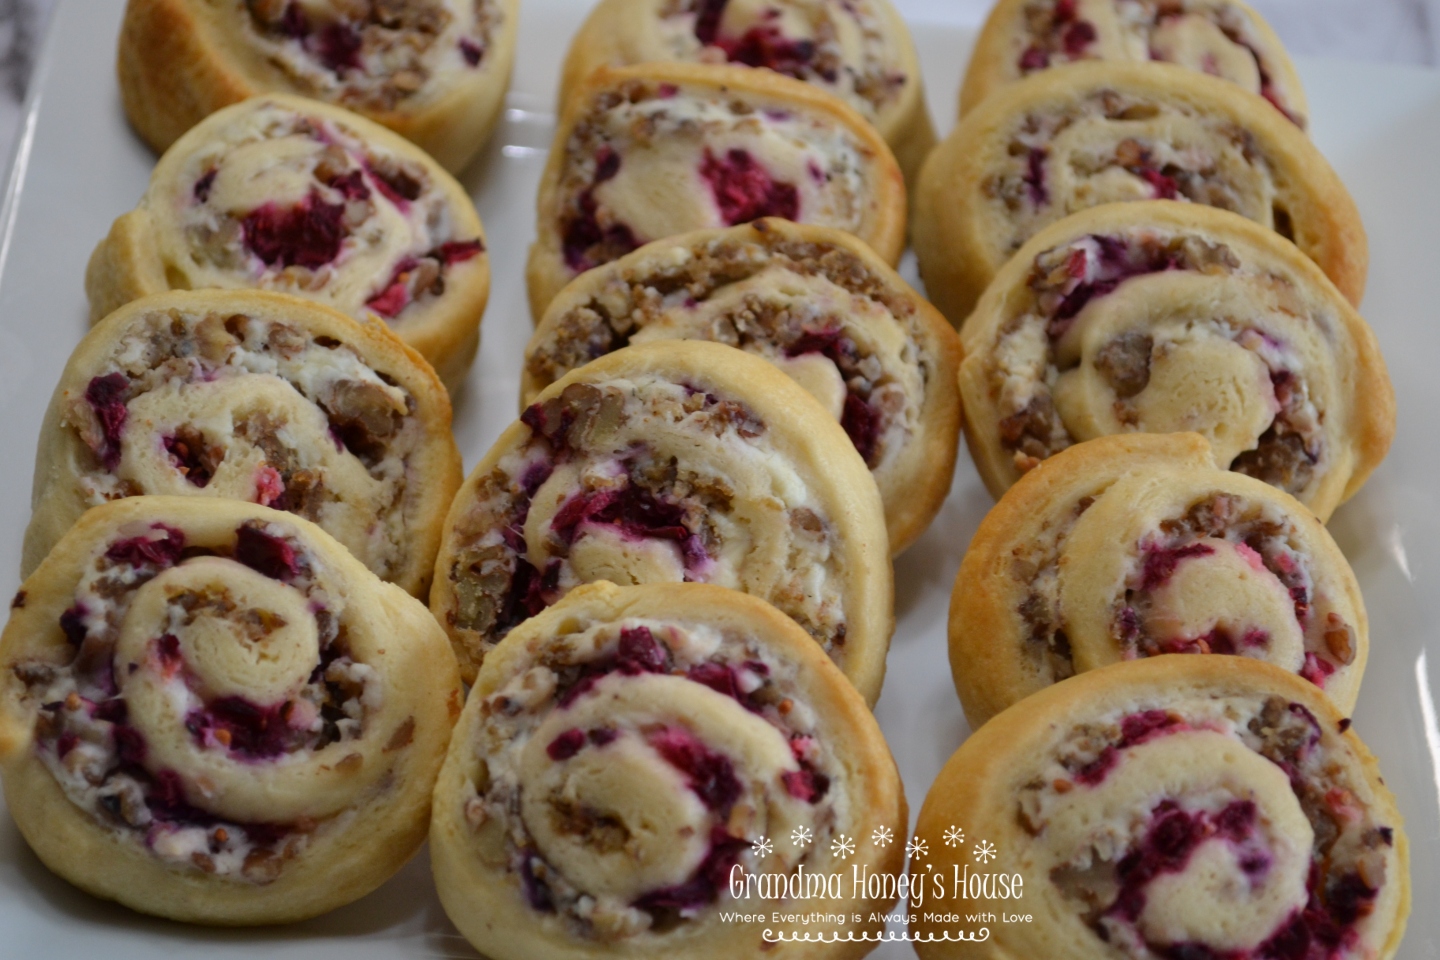 A crescent dough sheet filled with a mixture of cream cheese, cooked sausage crumbles, walnuts, topped with cranberry sauce, then rolled, sliced and baked.